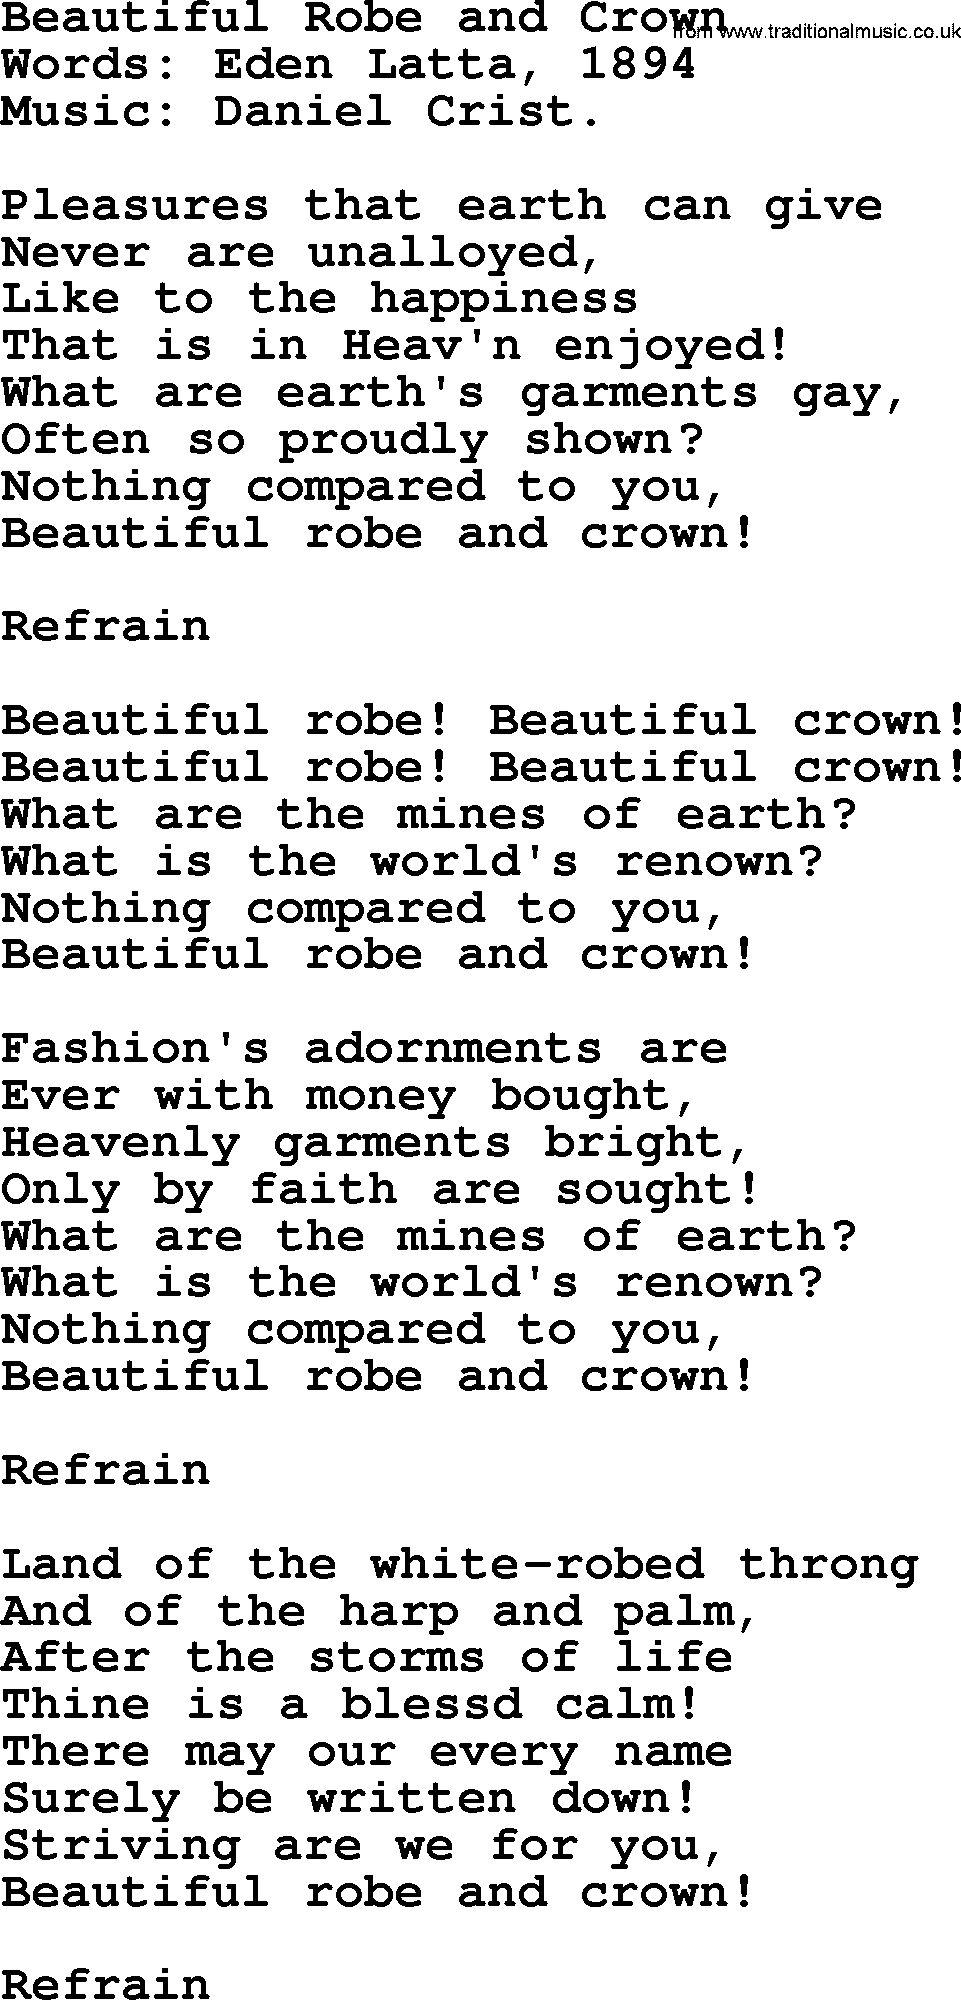 Songs and Hymns about Heaven: Beautiful Robe And Crown lyrics with PDF